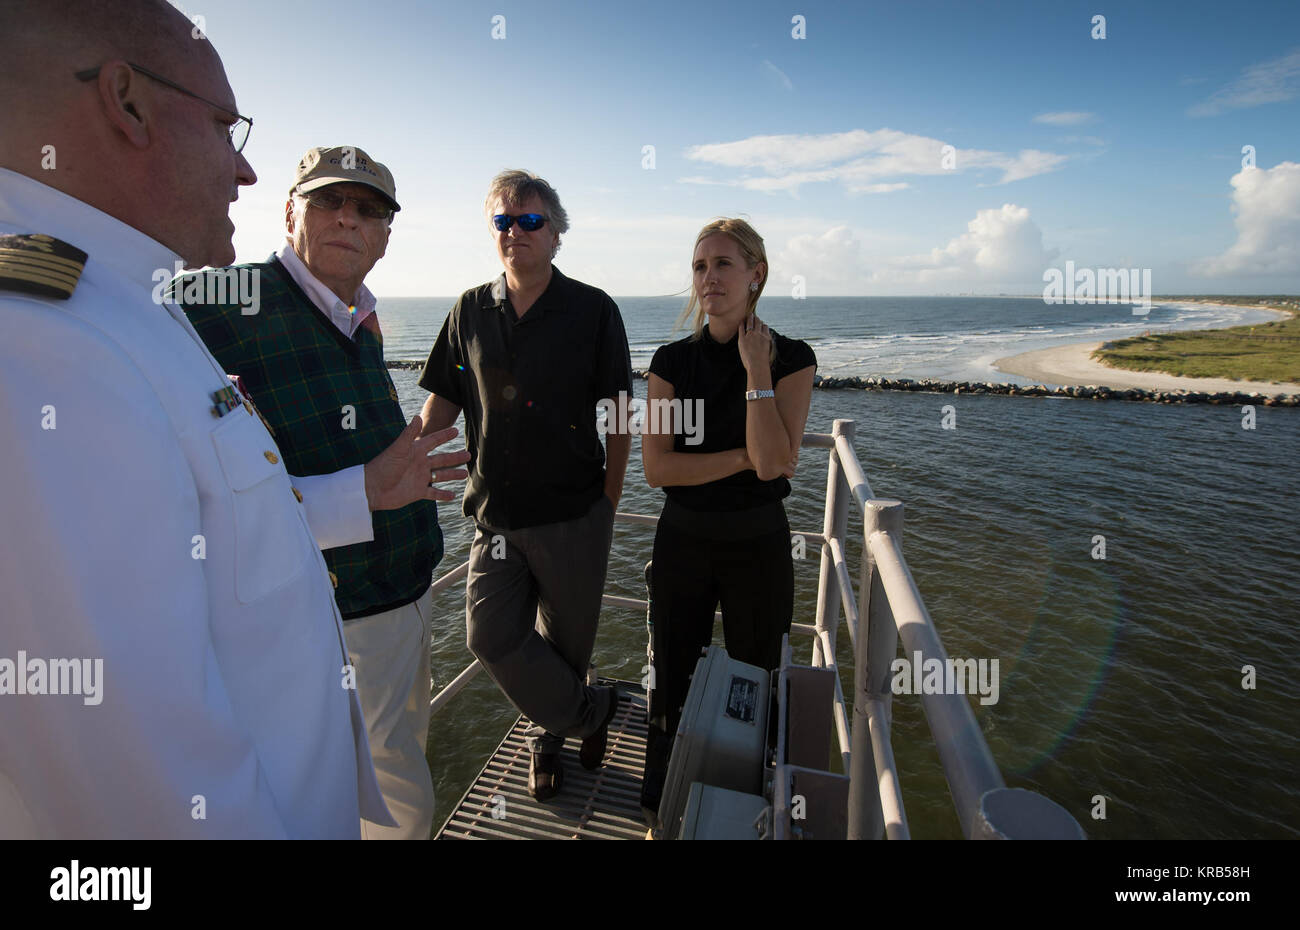 Navy Force Chaplain, Capt. Donald P. Troast, CHC, USN, left, talks with Dean Armstrong, brother of the late Neil Armstrong, Eric 'Rick' Armstrong, Neil Armstrong's son, center, and Molly Van Wagenen, Neil Armstrong's step-daughter, from the top of the USS Philippine Sea (CG 58) as it departs Mayport, Fla for the burial at sea service for Armstrong, Friday, Sept. 14, 2012, in the Atlantic Ocean. Armstrong, the first man to walk on the moon during the 1969 Apollo 11 mission, died Saturday, Aug. 25. He was 82. Photo Credit: (NASA/Bill Ingalls) Neil Armstrong burial at sea (201209140002HQ) Stock Photo